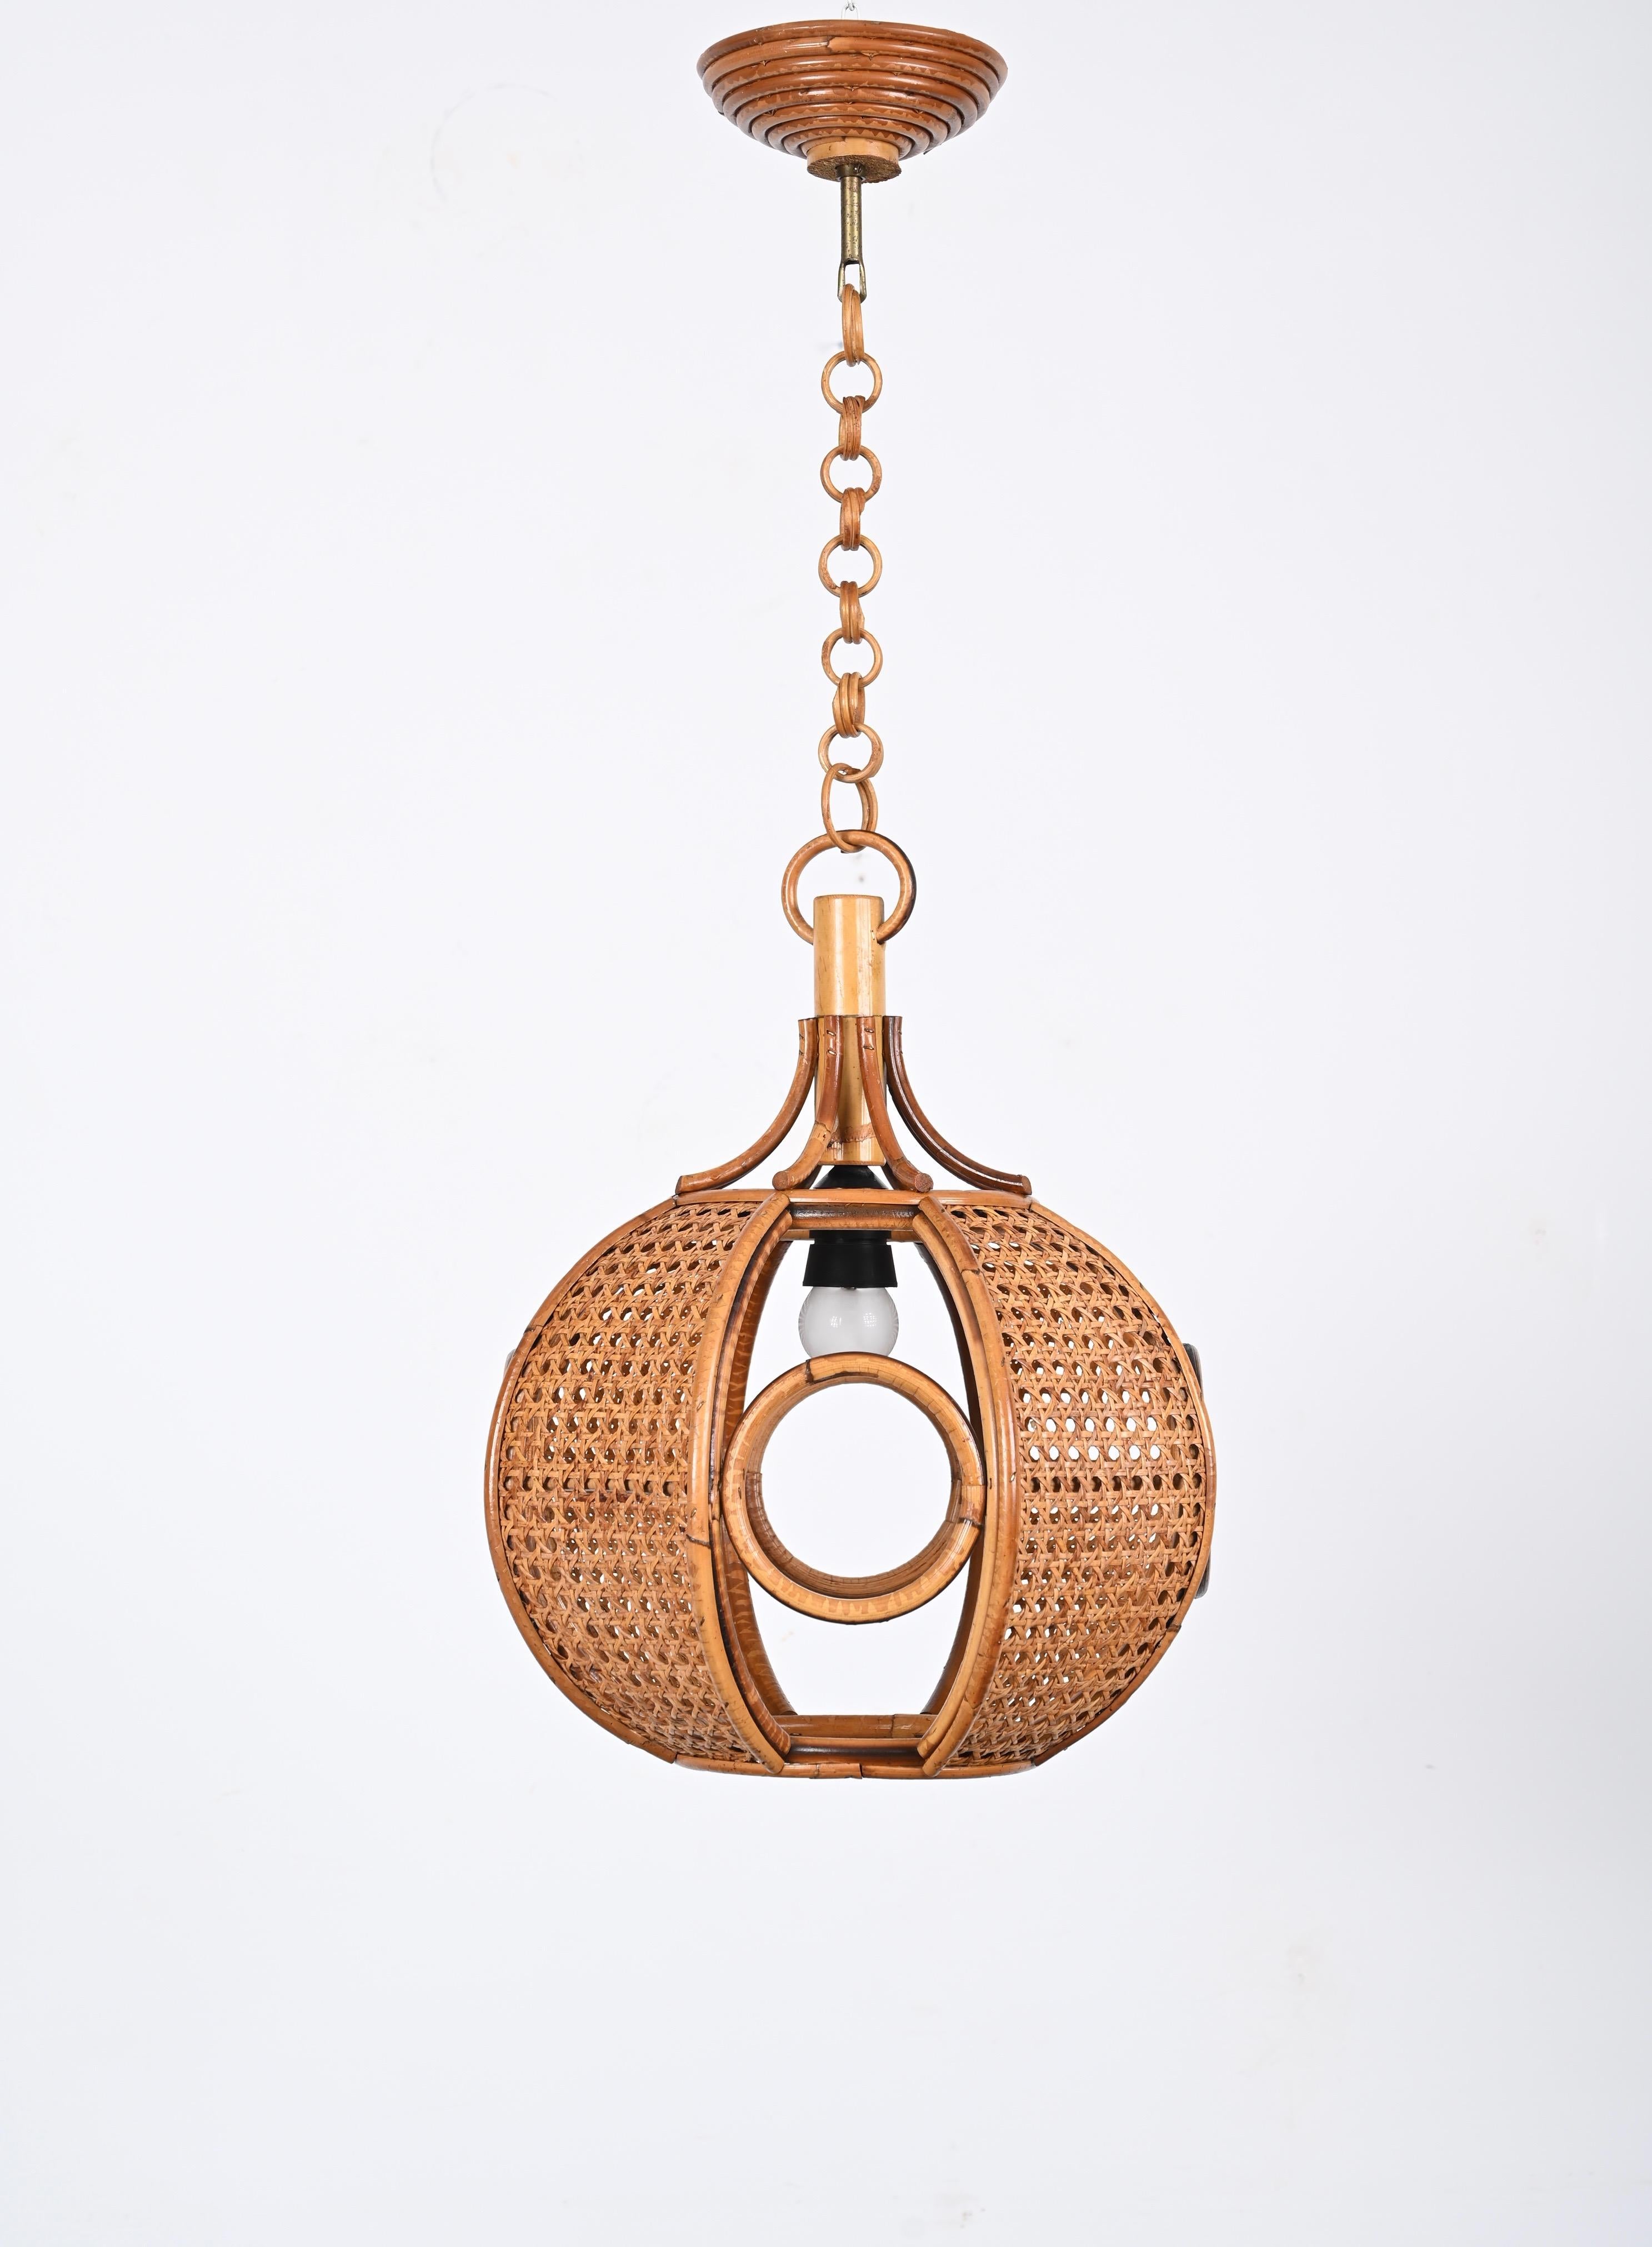 Midcentury French Riviera Chapel Rattan and Wicker Italian Chandelier, 1960s For Sale 7